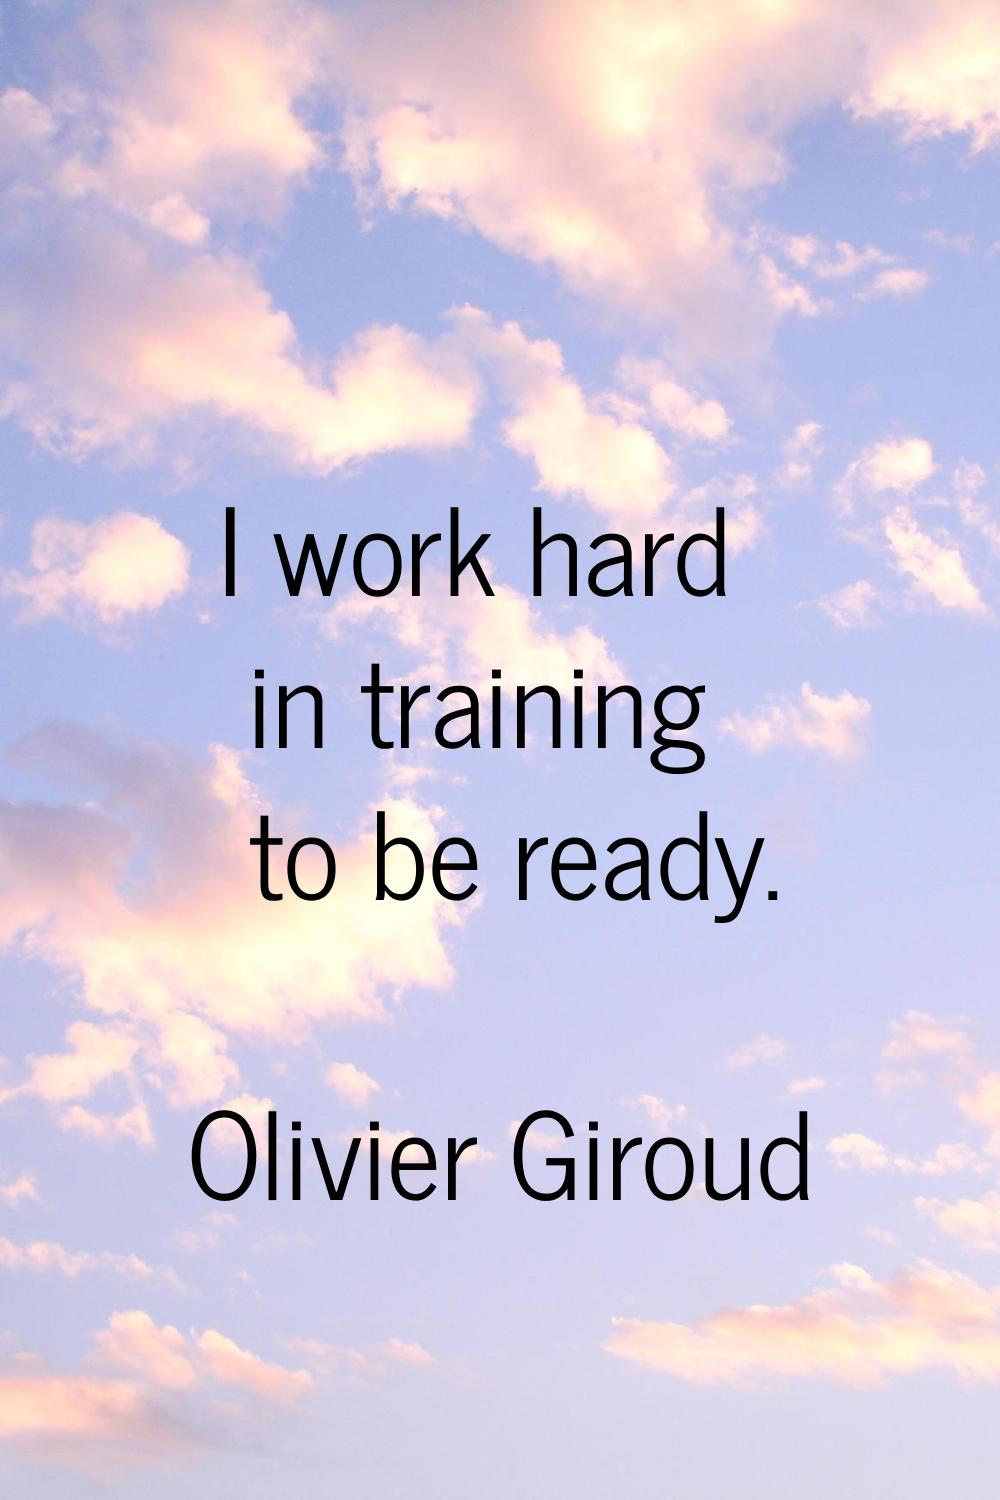 I work hard in training to be ready.